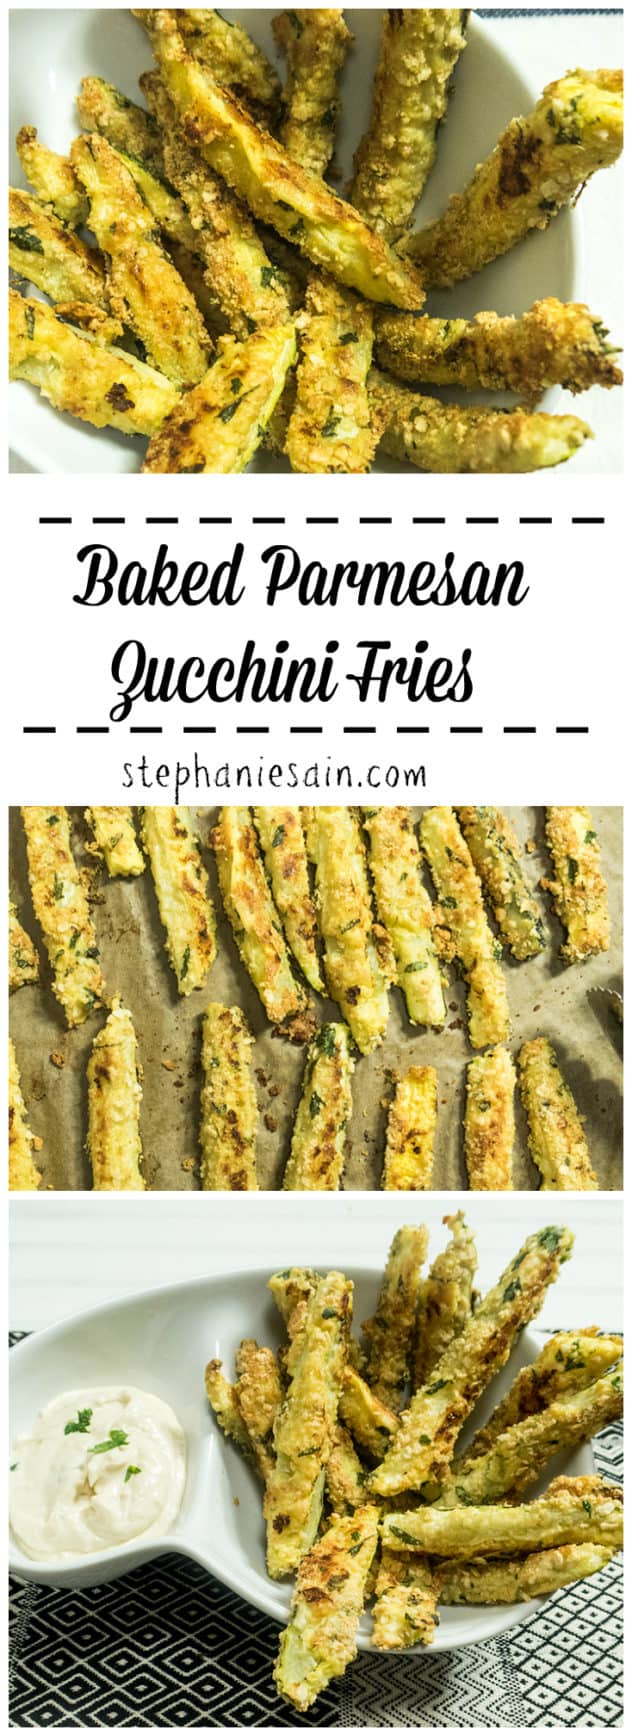 Baked Parmesan Zucchini Fries are a tasty, healthier fry with less than five ingredients. Perfect as a side or appetizer. Gluten Free & Vegetarian.